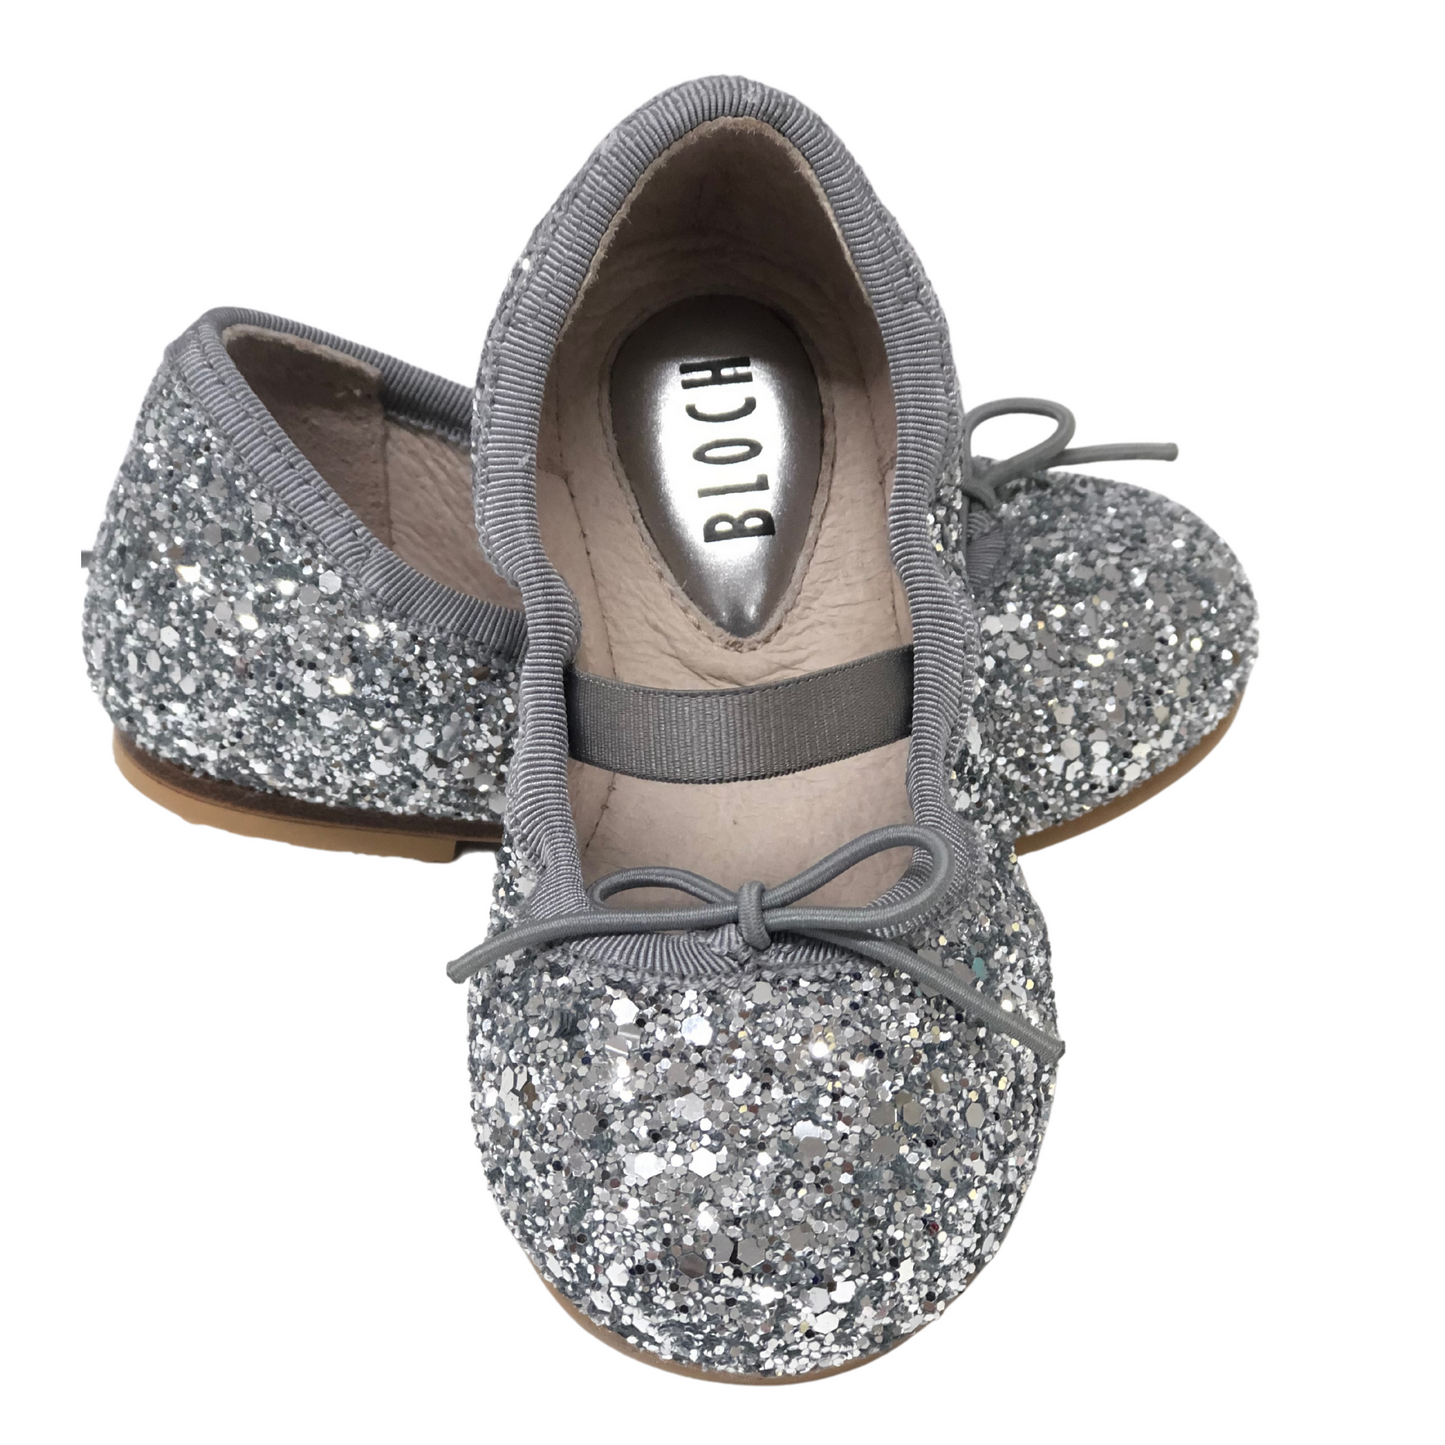 Bloch Silver Sparkly Party Shoes